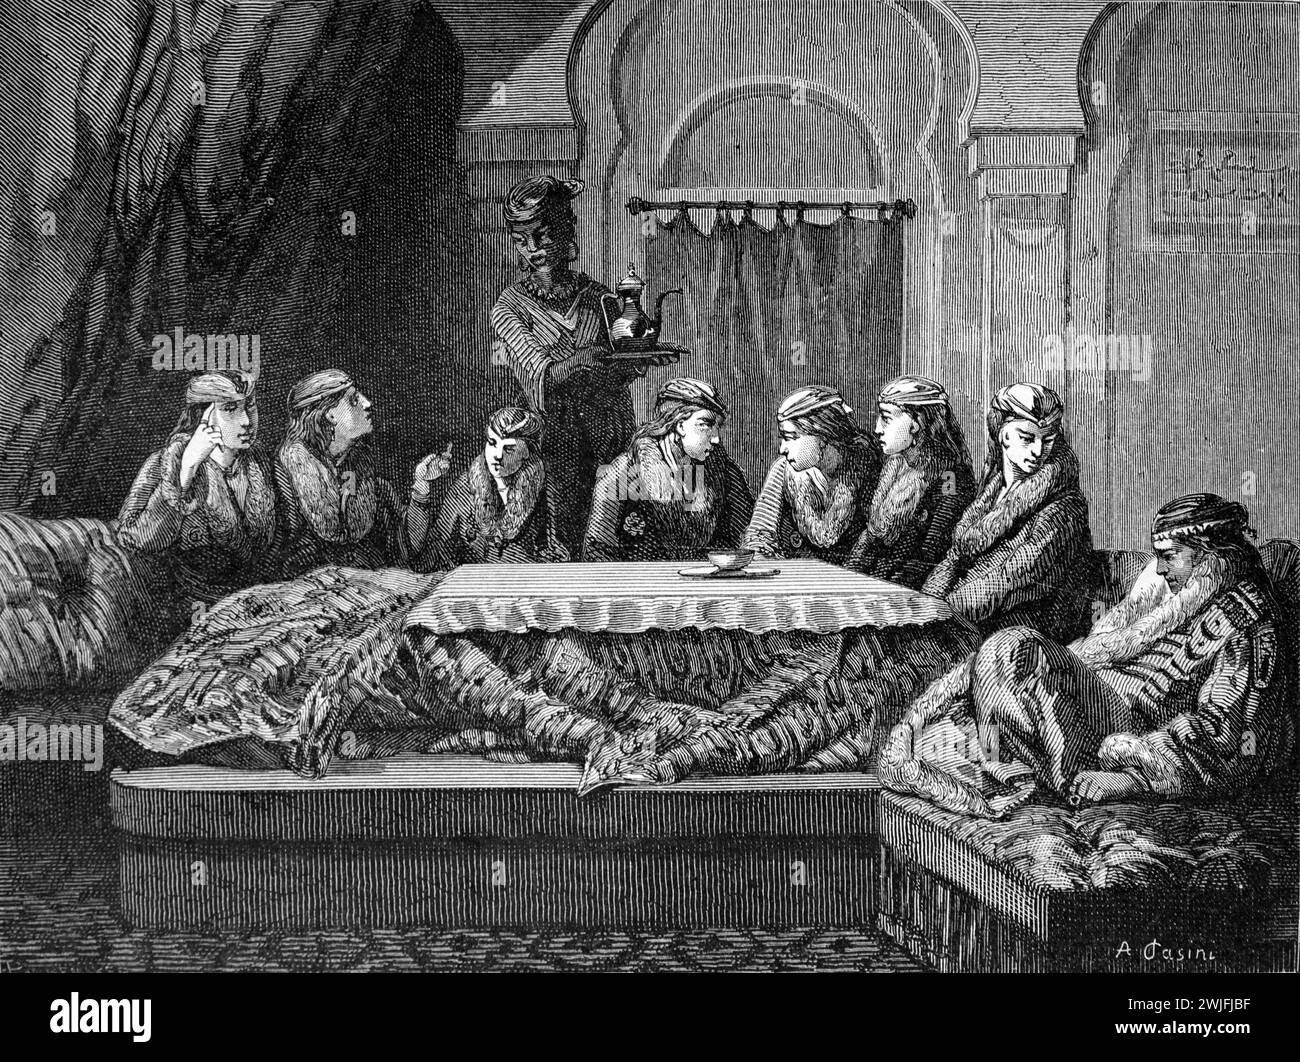 Turkish Women Being Served Tea or Coffee in a Turkish Harem, Huddled Around a Wood Stove Heater known as a Tandour Istanbul Turkey. Vintagz or Historic Engraving or Illustration 1863 Stock Photo